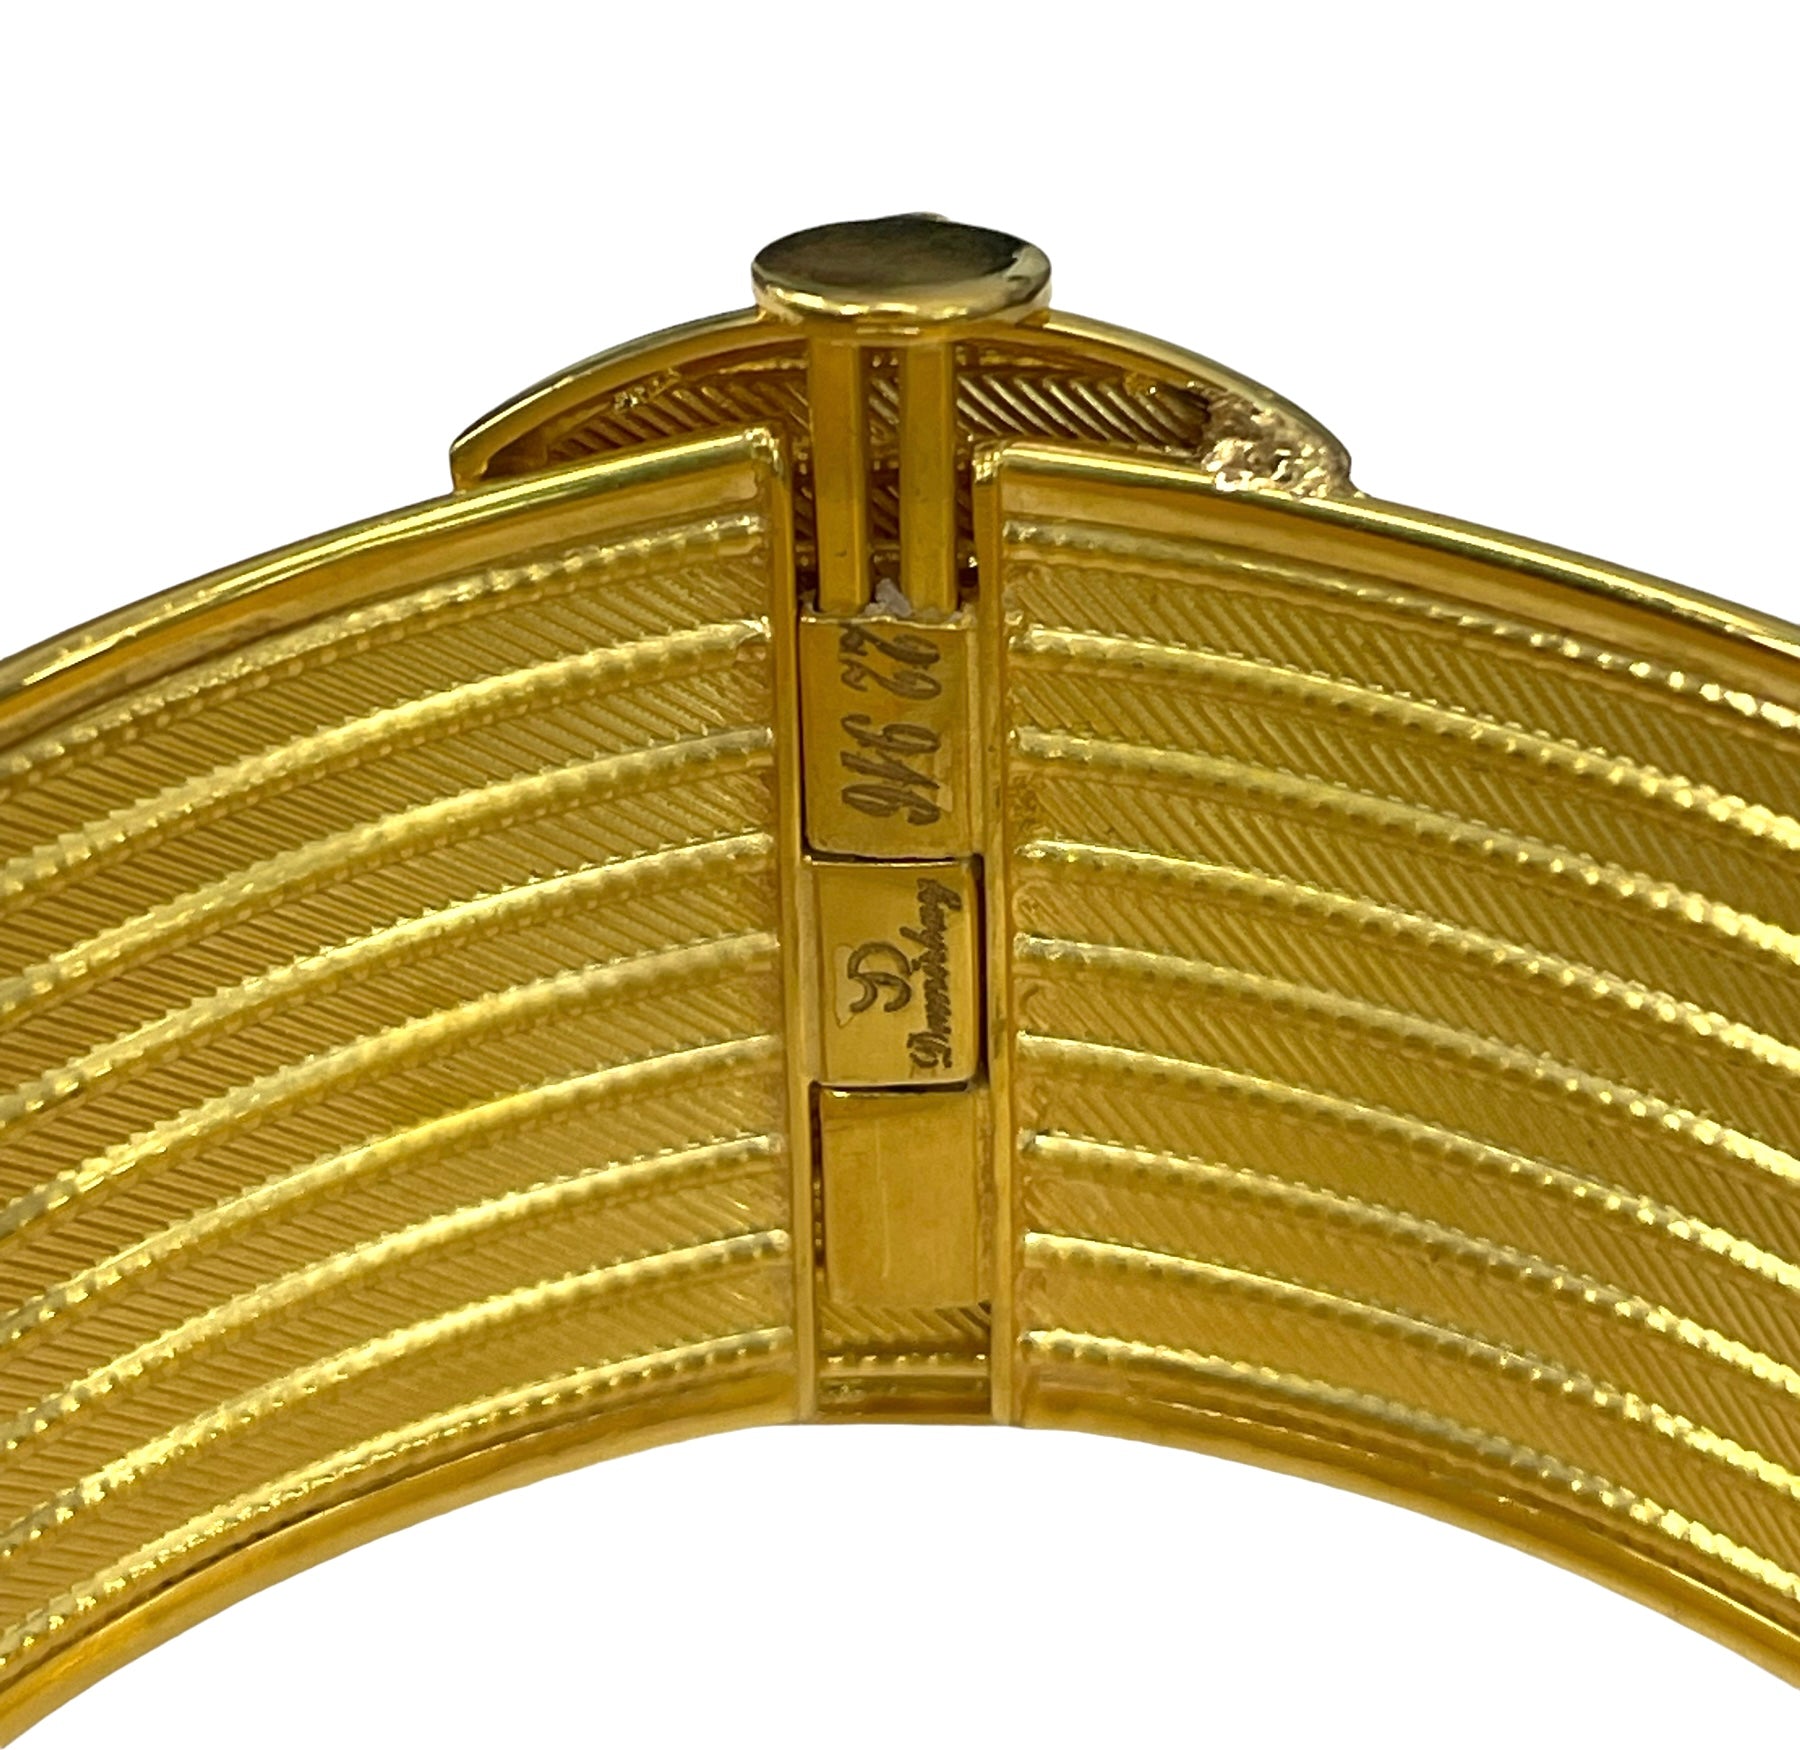 Pharaoh Cuff Yellow Gold Bracelet 22Kt Solid Gold